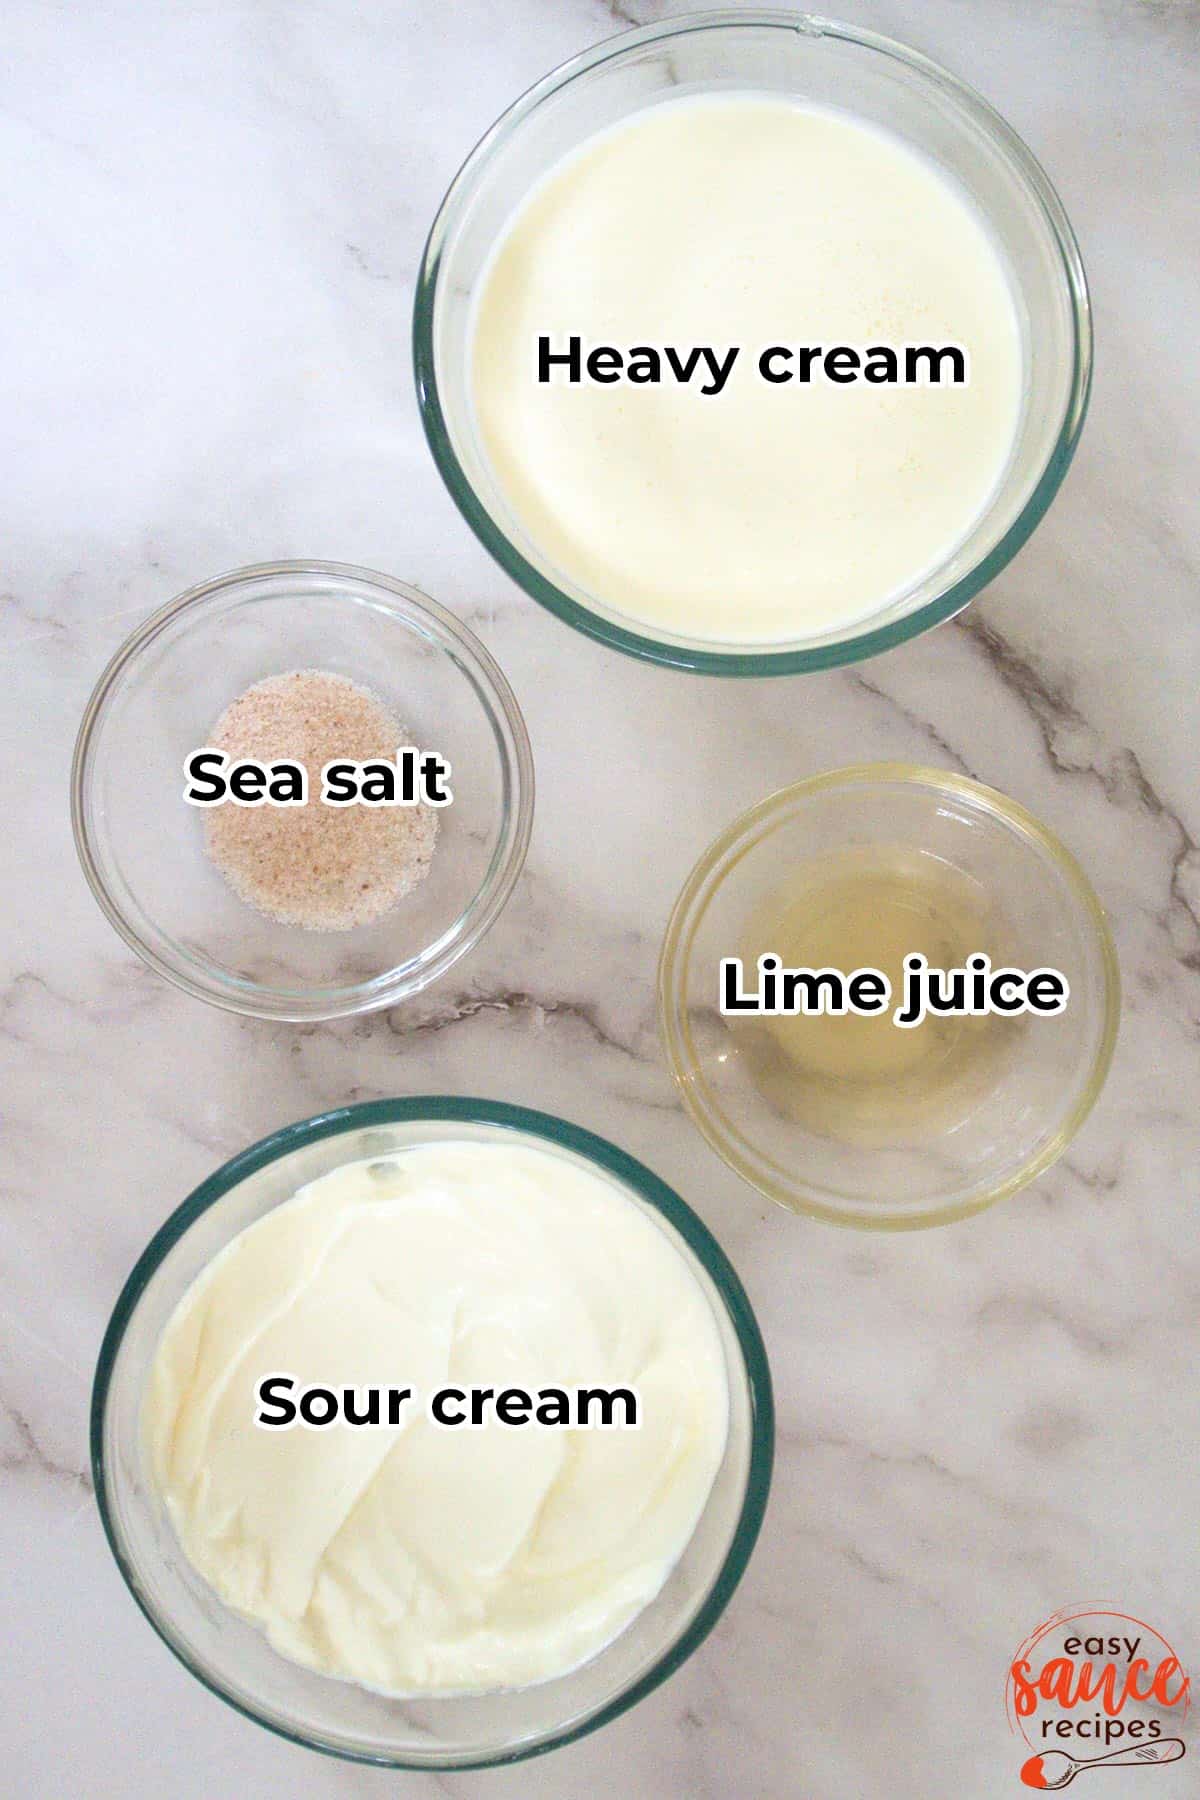 all the ingredients for crema sauce in separate bowls with labels